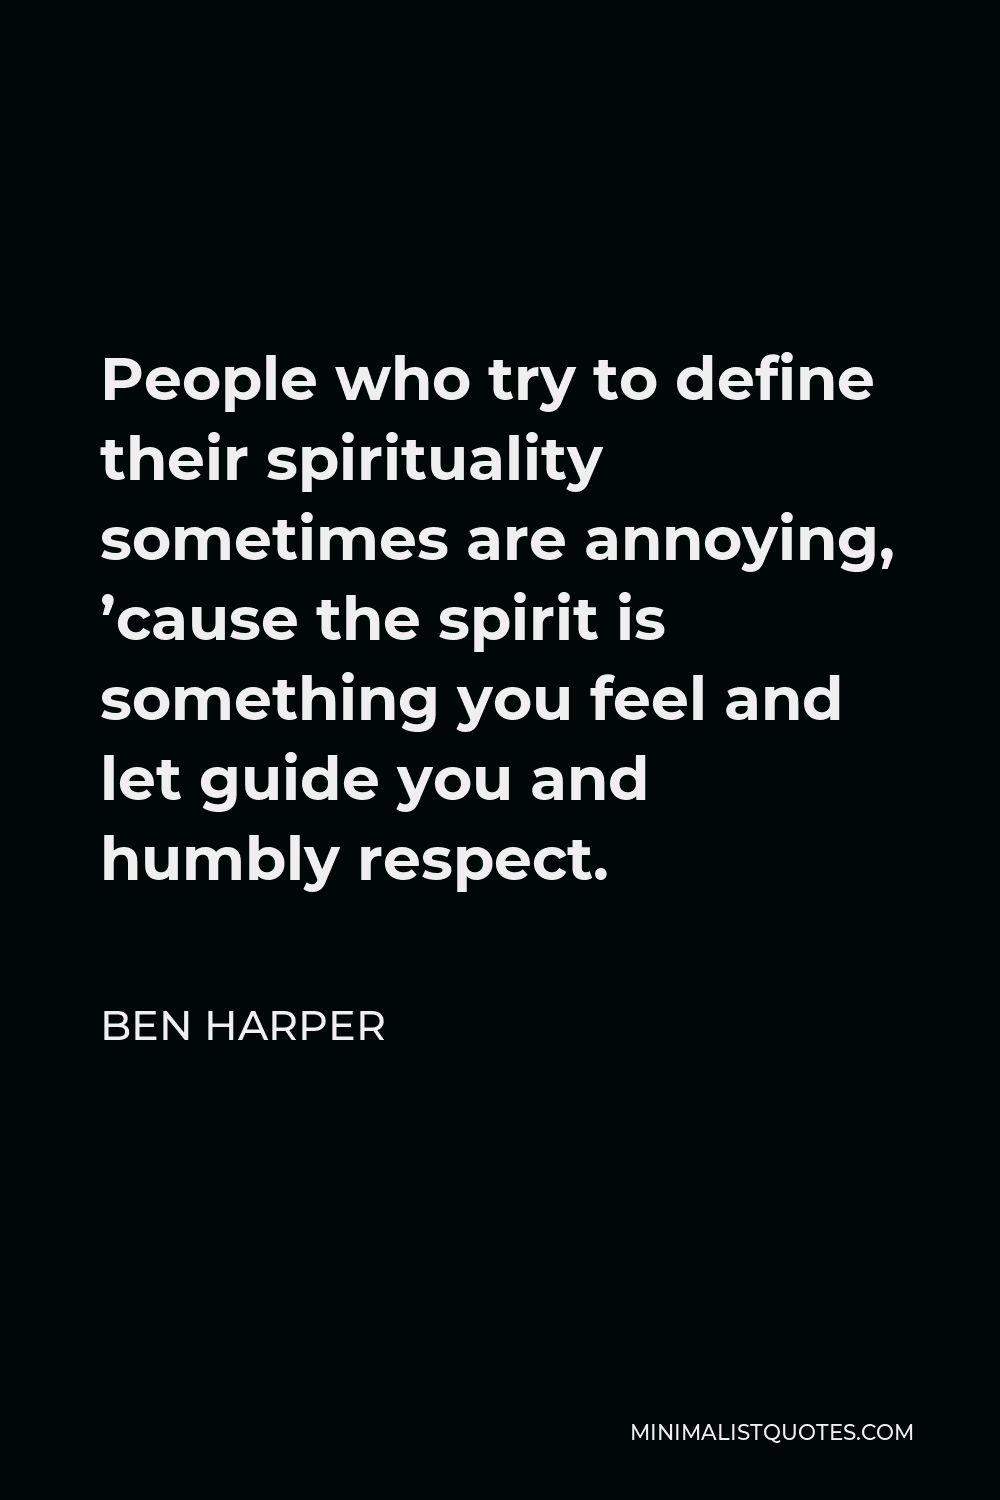 Ben Harper Quote - People who try to define their spirituality sometimes are annoying, ’cause the spirit is something you feel and let guide you and humbly respect.